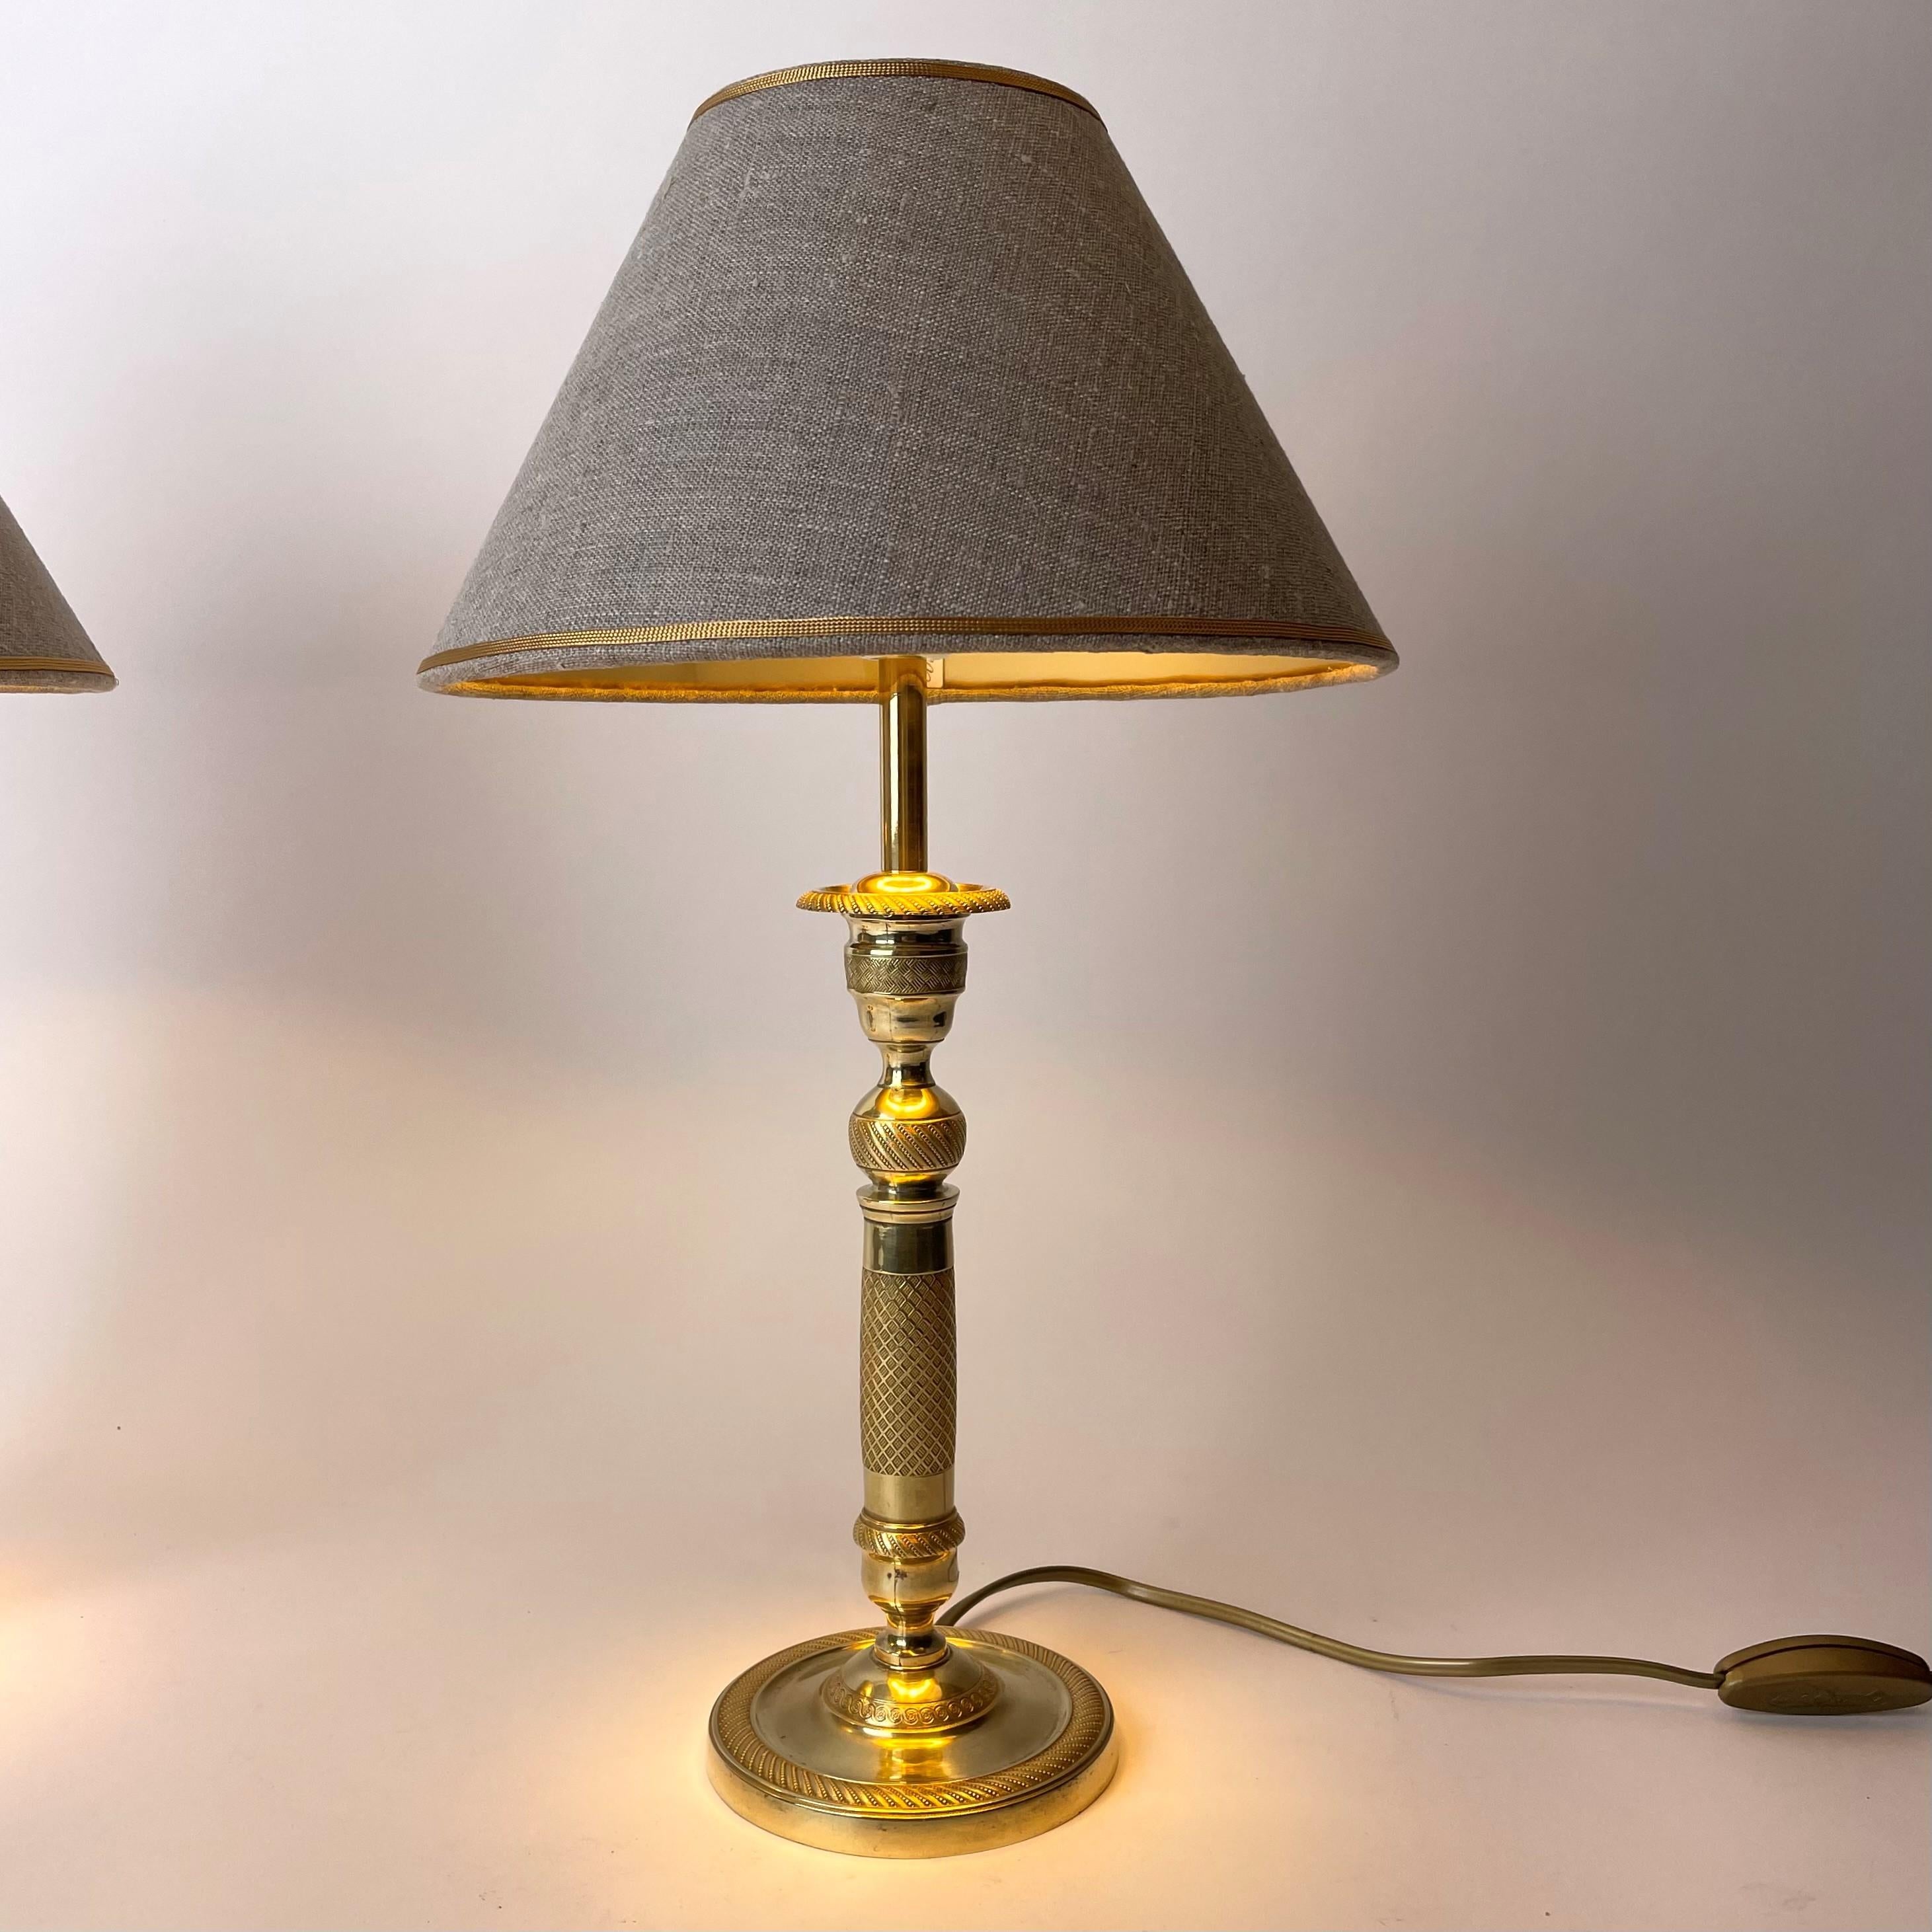 French Beautiful Pair of Table Lamps Originally Empire Candlesticks from the 1820s